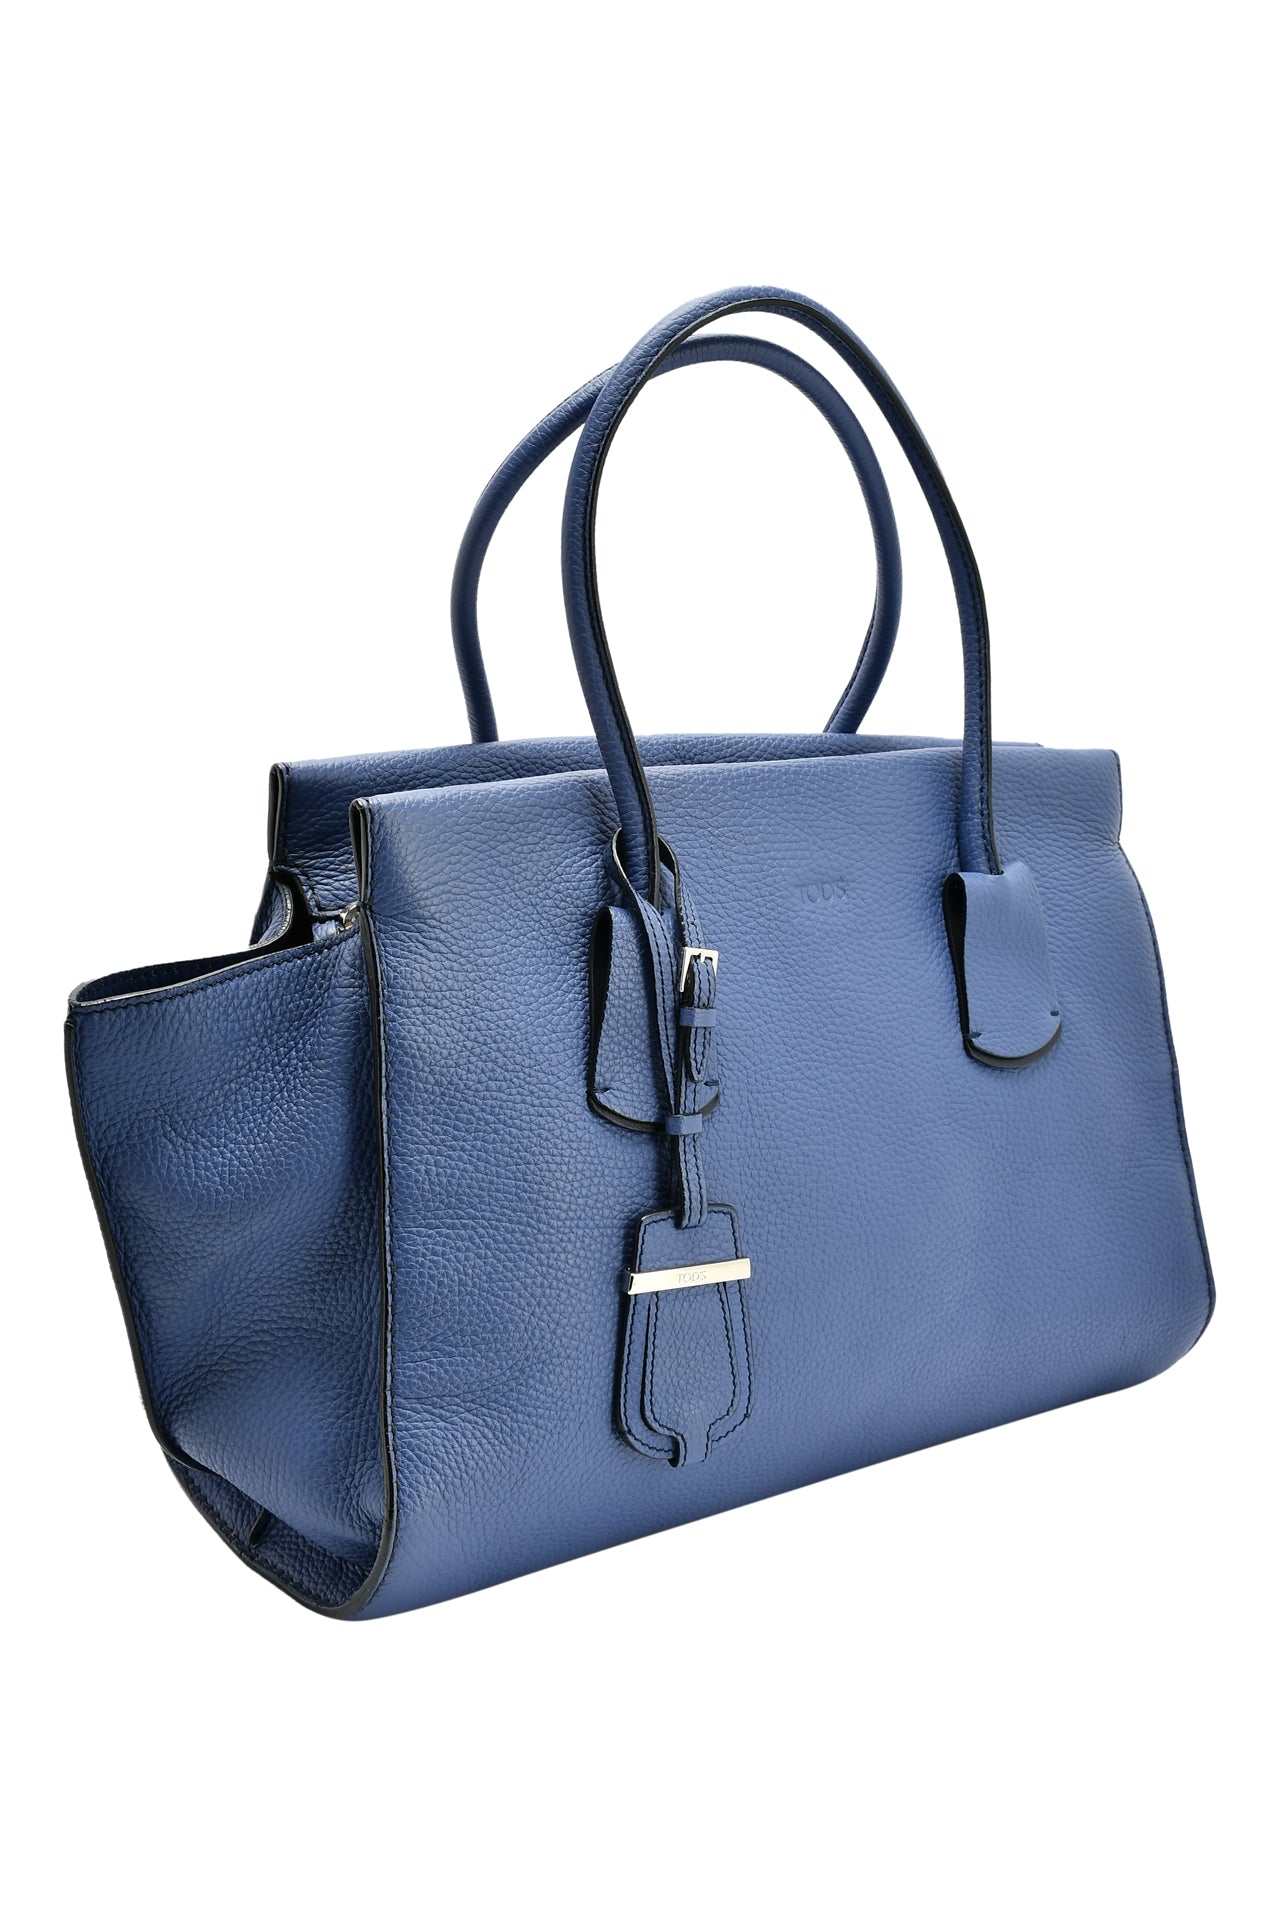 Tod's Blue Grained Leather Tote